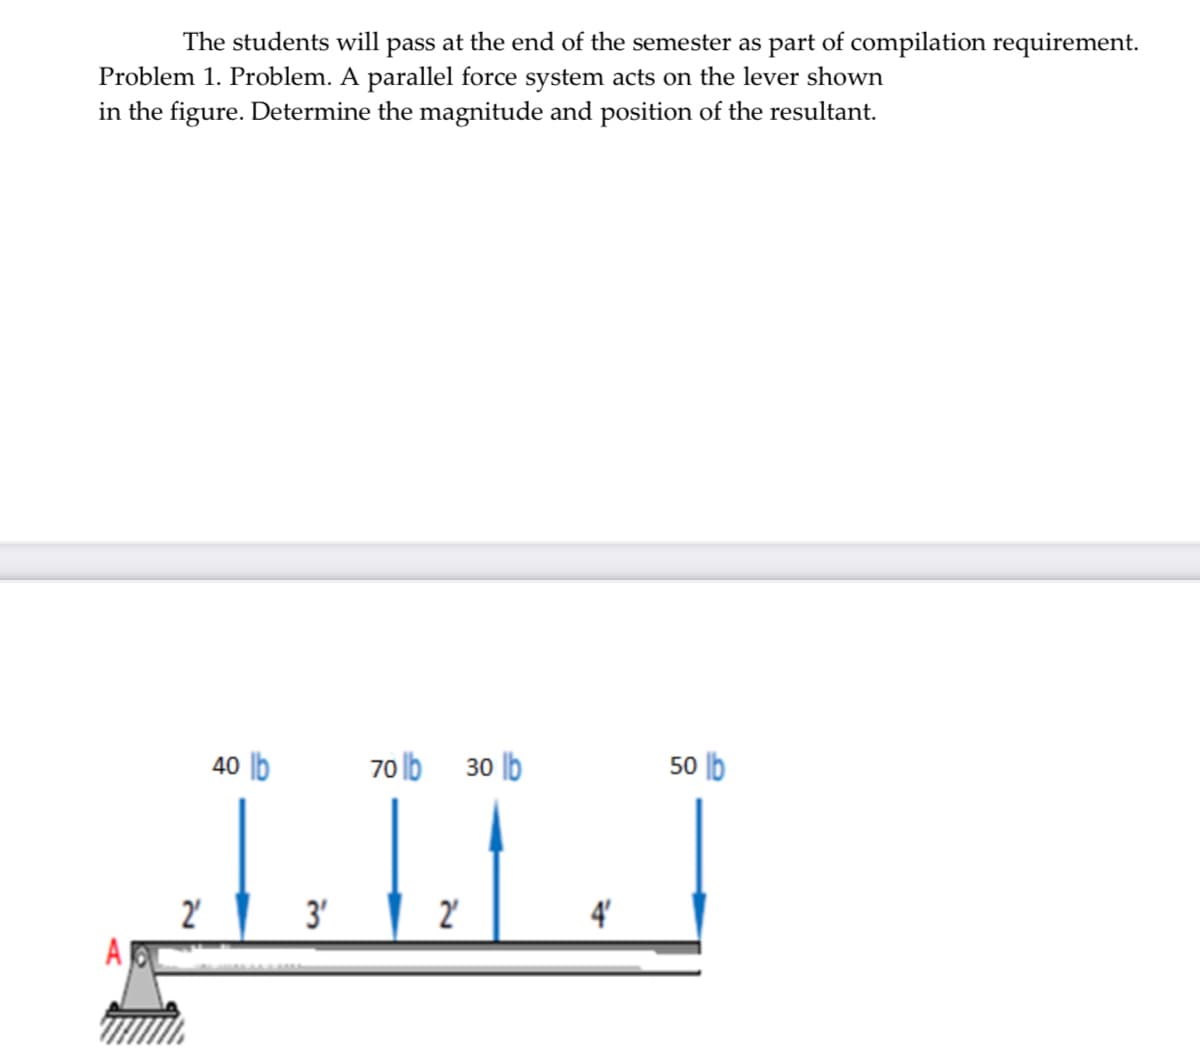 The students will pass at the end of the semester as part of compilation requirement.
Problem 1. Problem. A parallel force system acts on the lever shown
in the figure. Determine the magnitude and position of the resultant.
40 |b
70 lb
LLLI
30 b
50 lb
3'
2'
4
